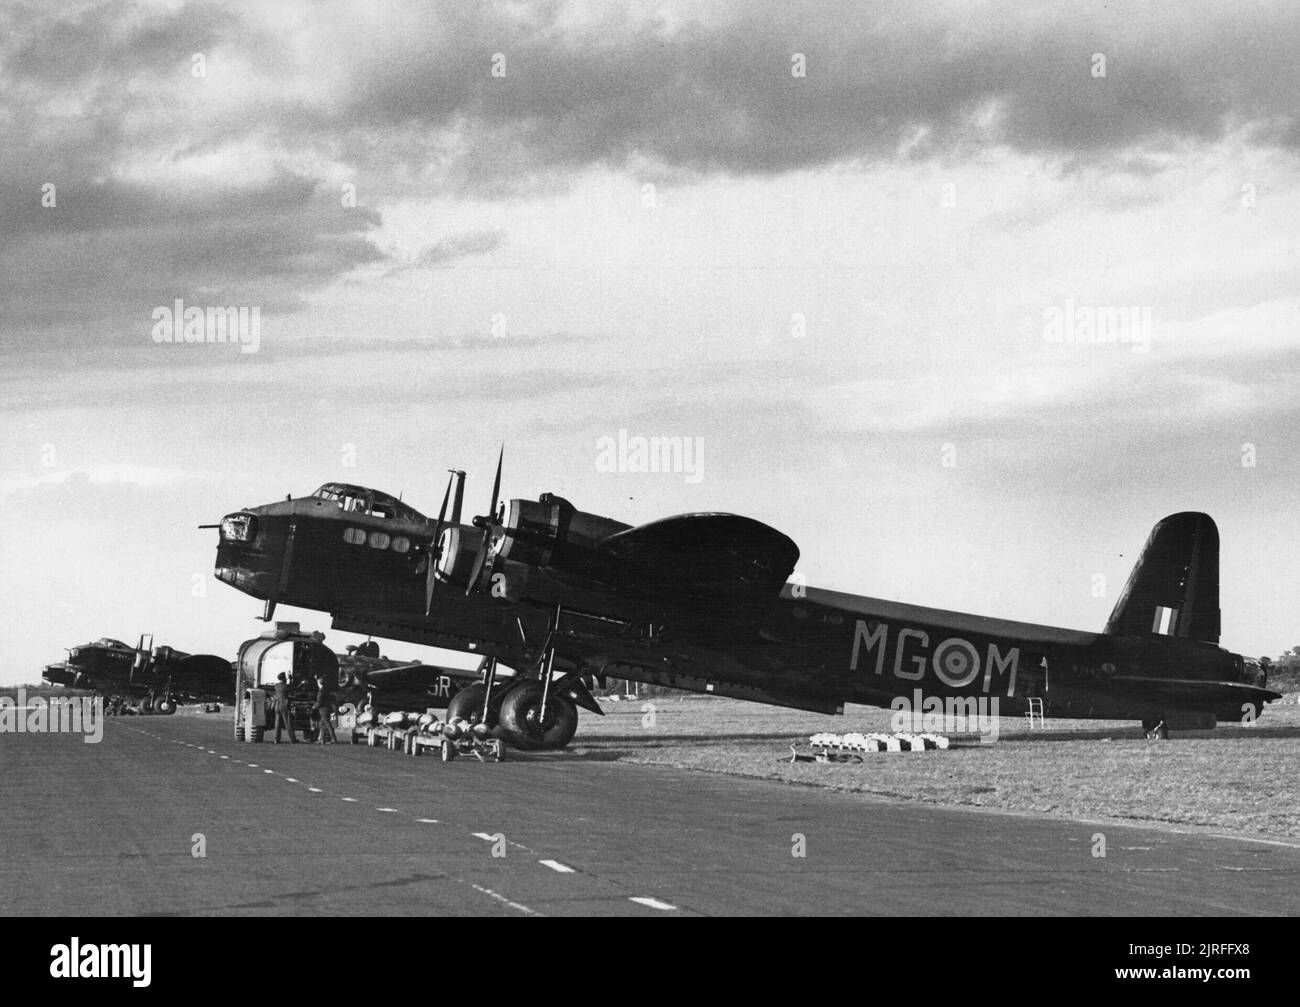 RAF Bomber Command Short Stirlings of No. 7 Squadron lined up at Oakington, October 1941. W7442 'MG-M' is in the foreground. A Wellington with No. 101 Squadron codes can also be seen in the background. Stock Photo